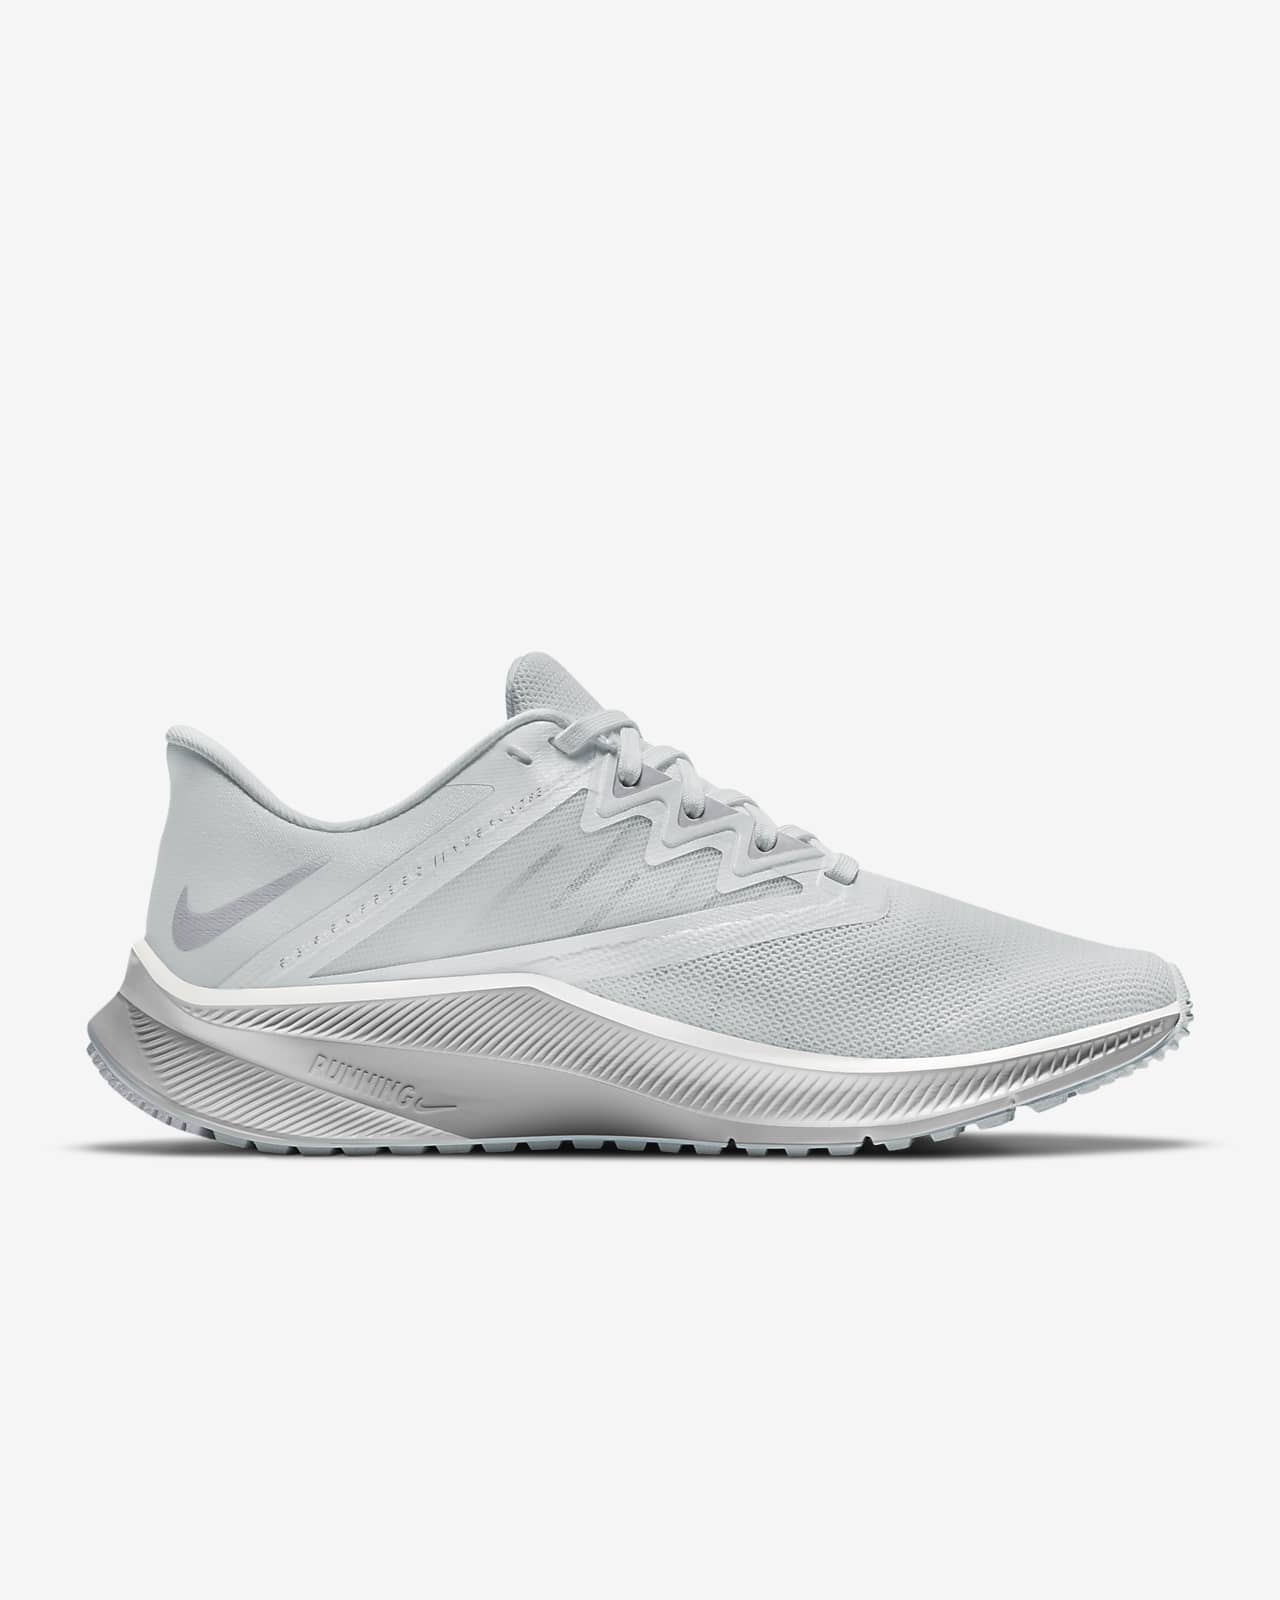 Nike Running Quest 5 trainers in white | ASOS